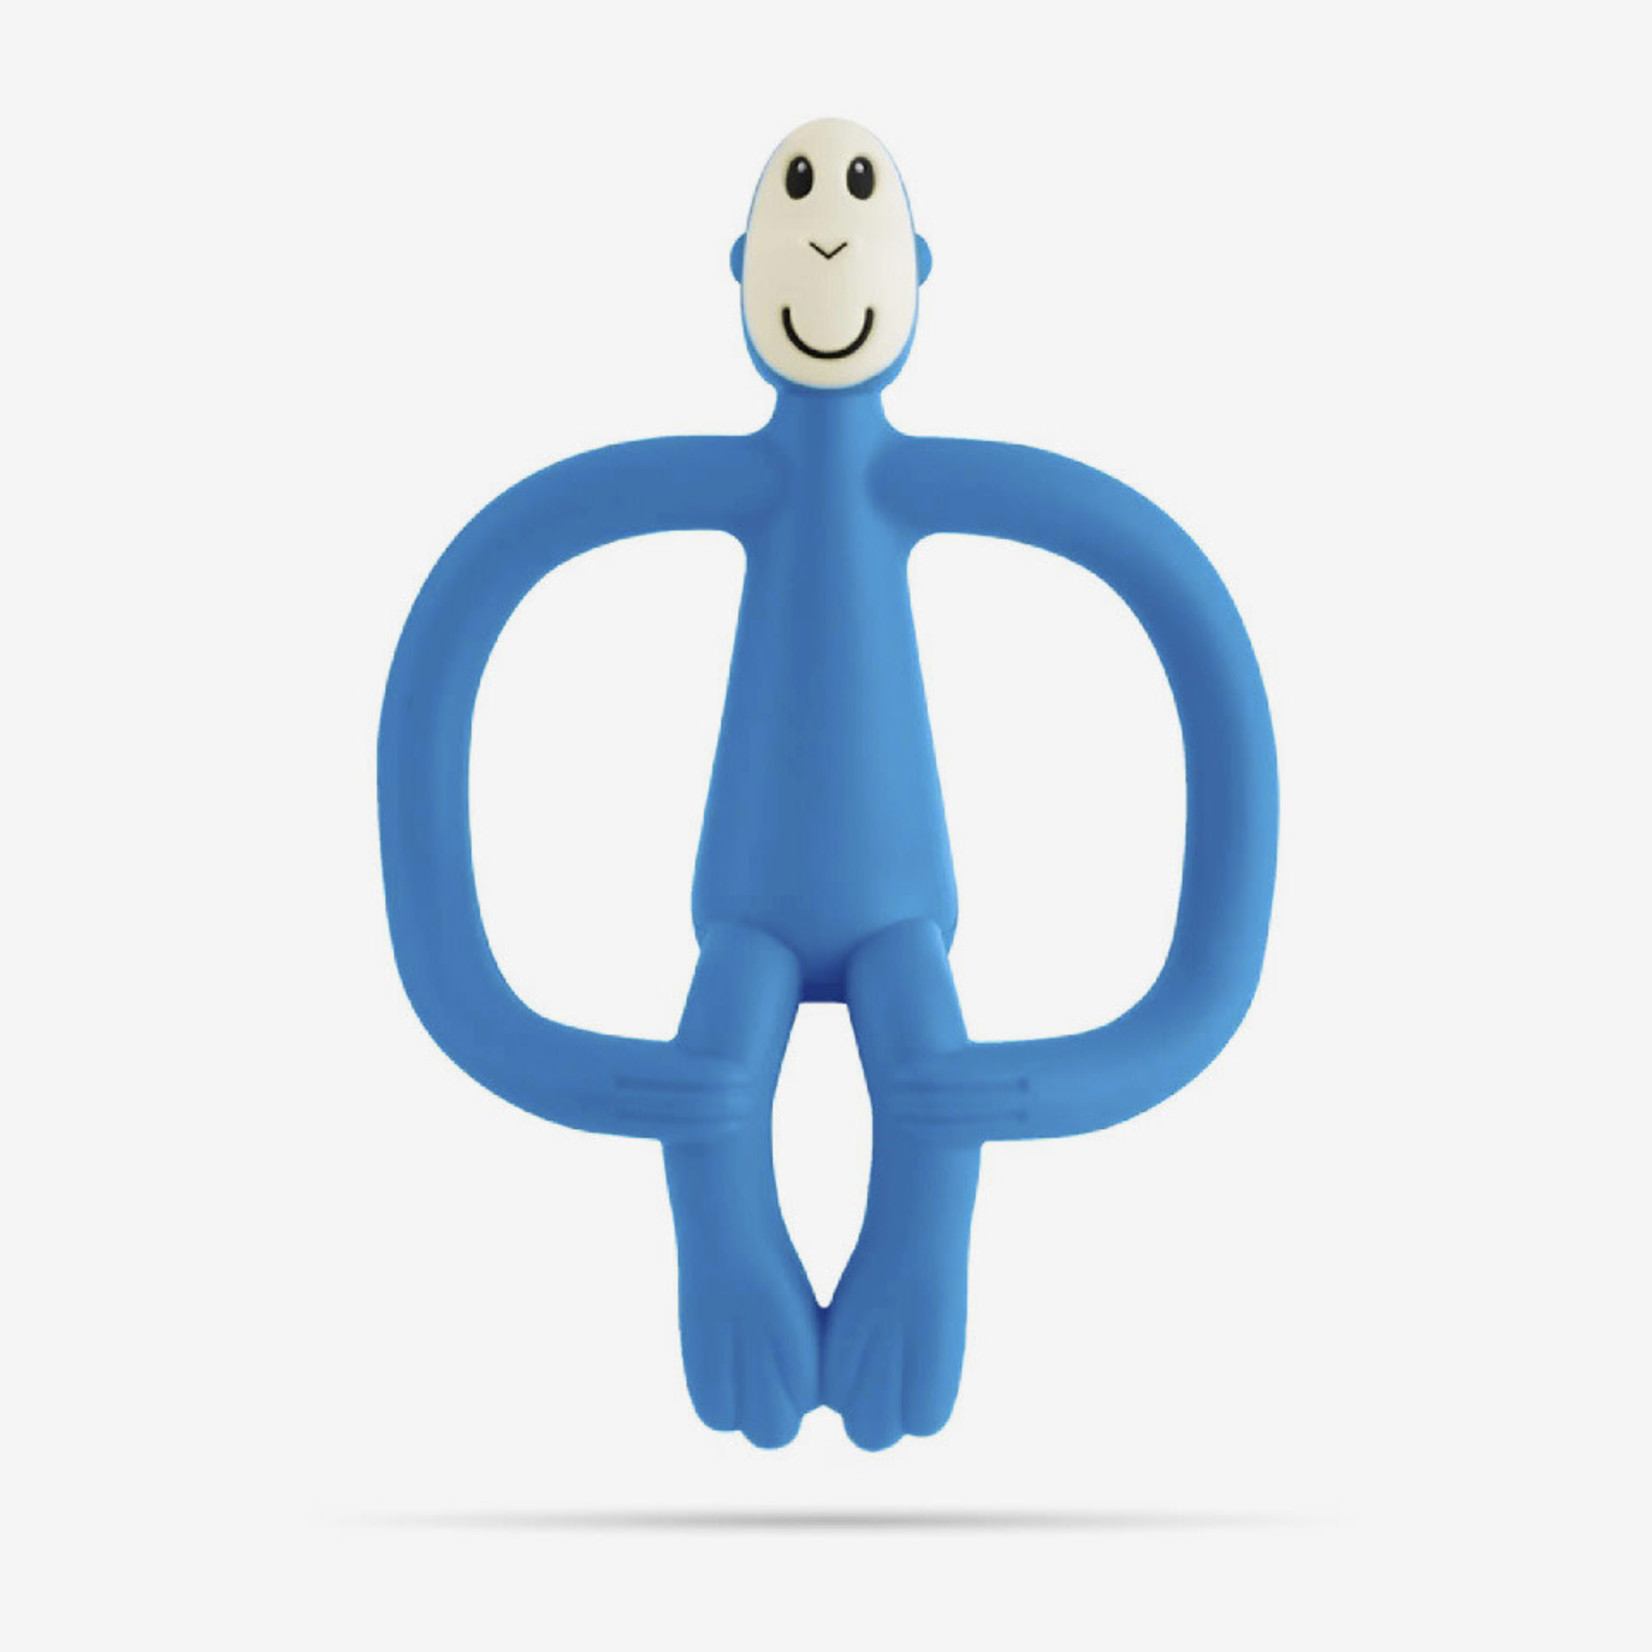 Matchstick Monkey Teething Toy and Gel Applicator-Blue